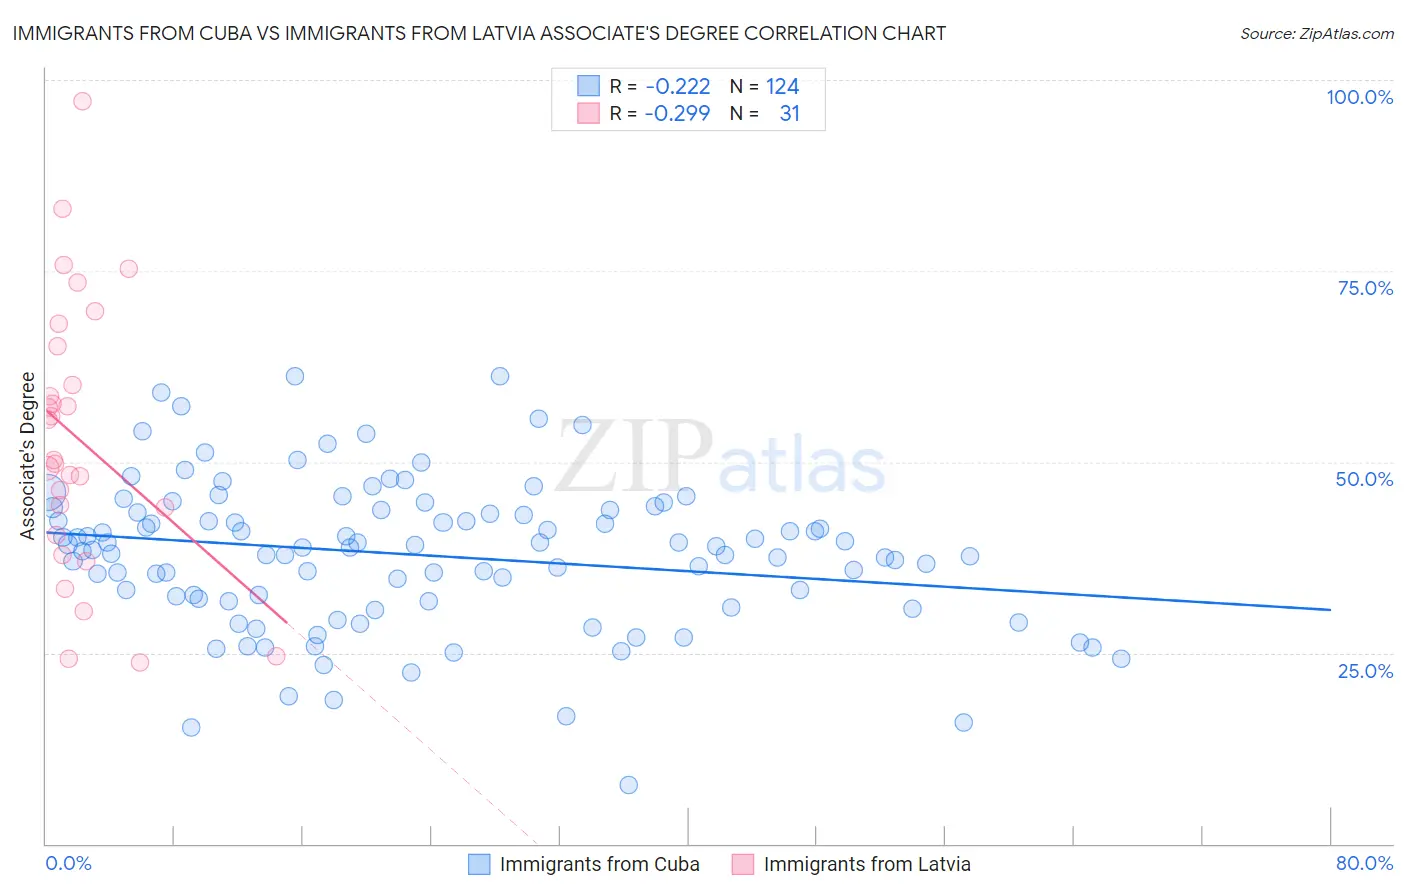 Immigrants from Cuba vs Immigrants from Latvia Associate's Degree